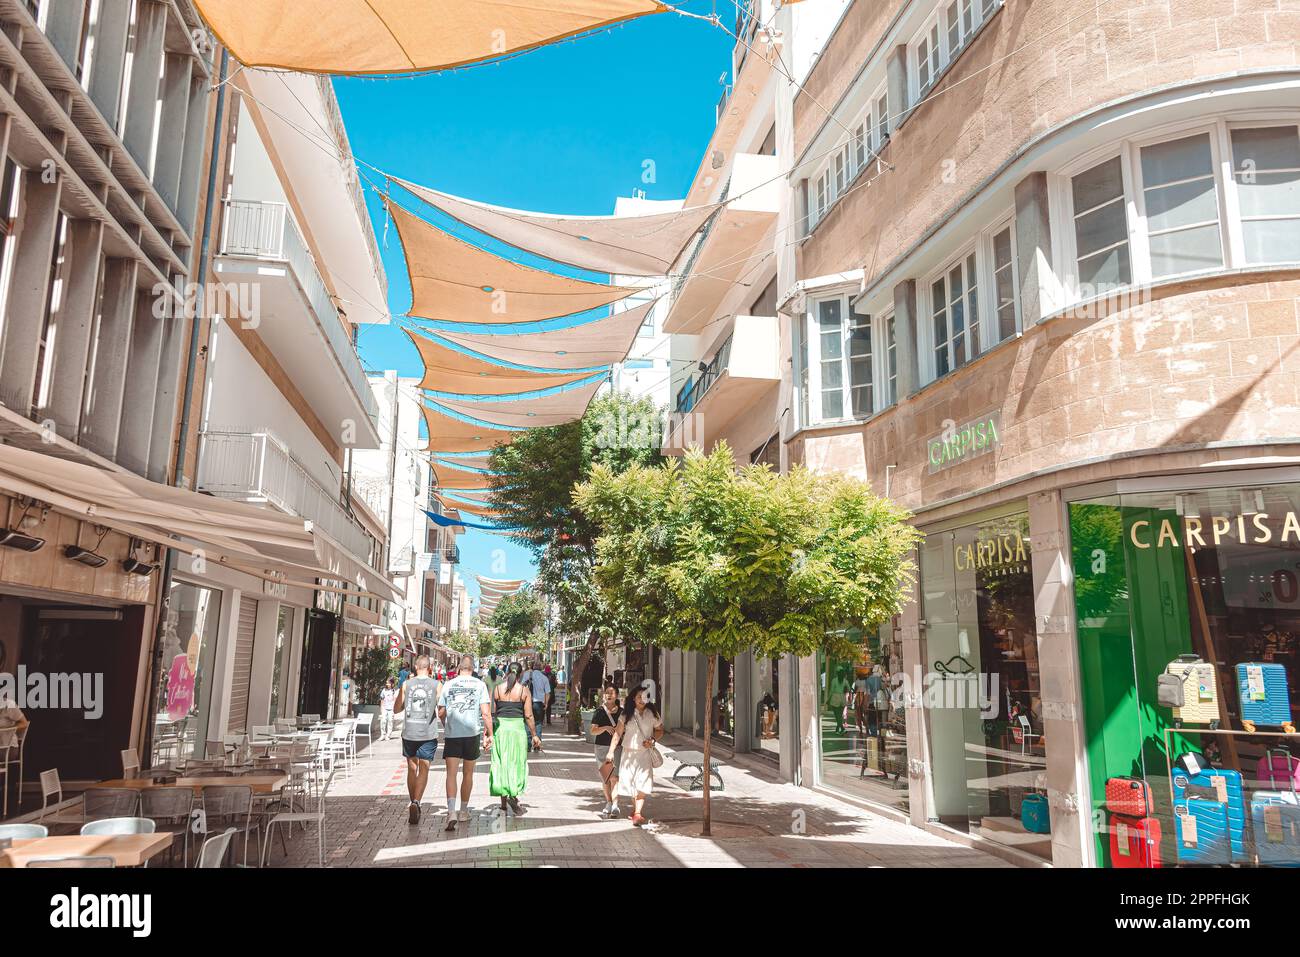 Nicosia, Cyprus - September 24, 2022: People walking around the Ledra street. It is is a major shopping thoroughfare in central Nicosia Stock Photo